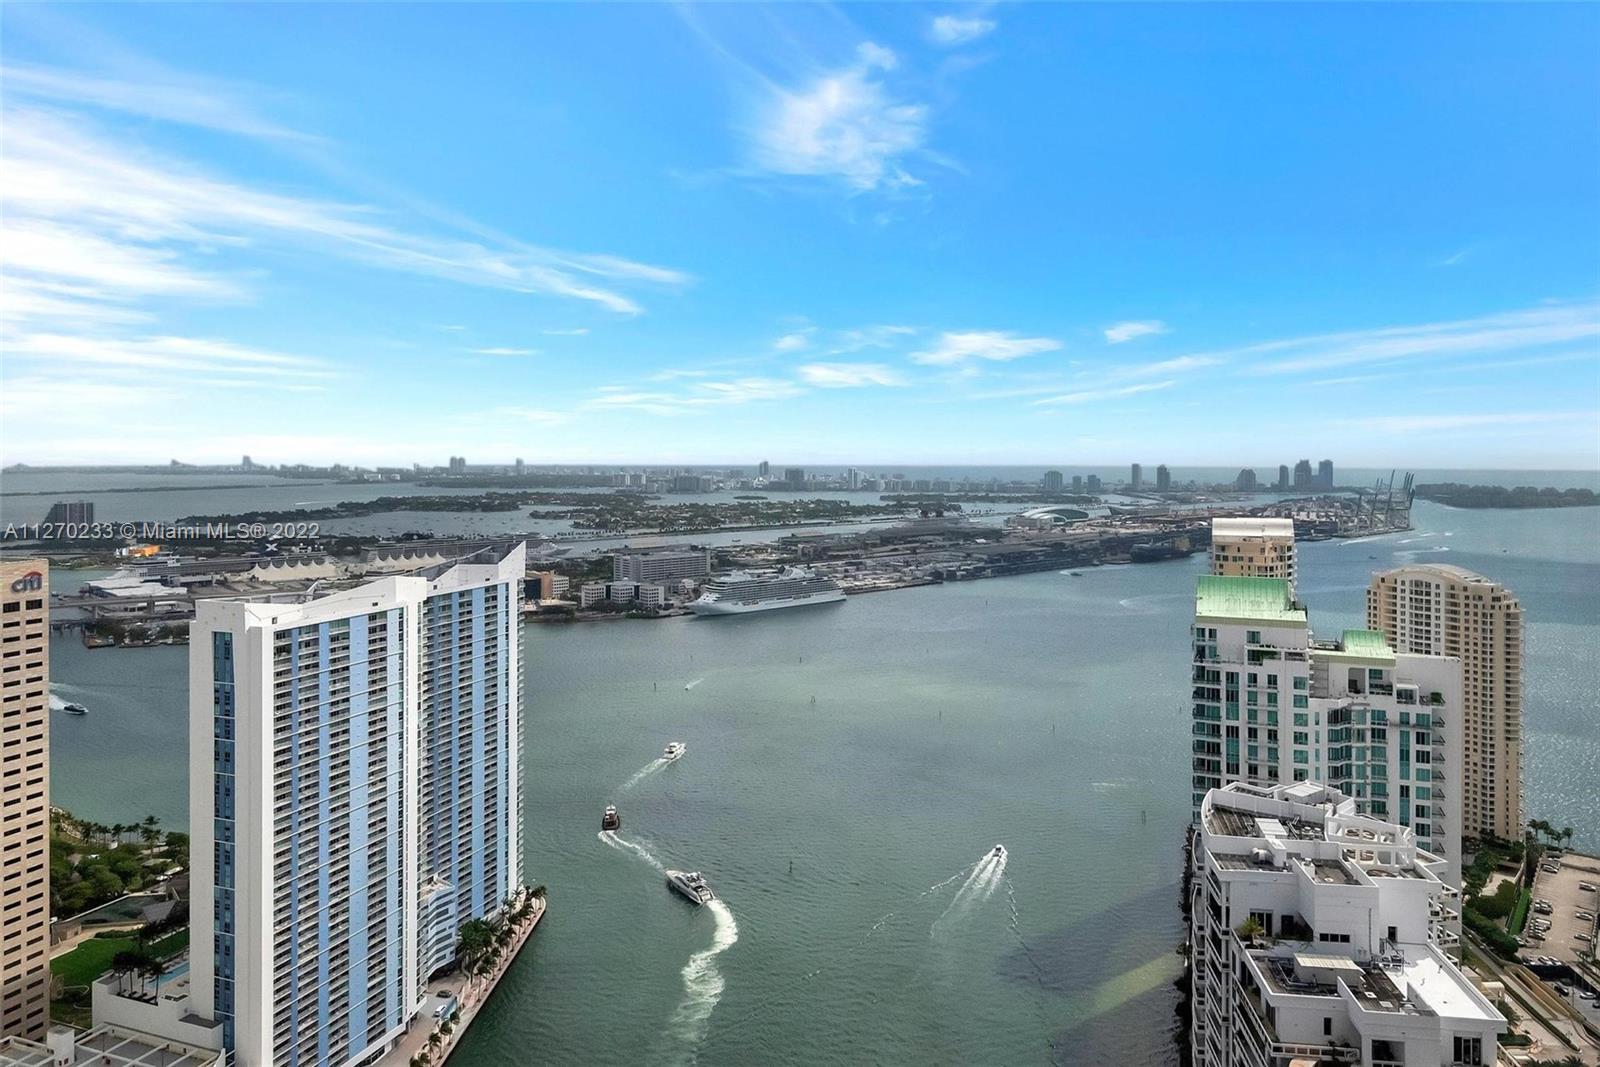 Welcome to your new home in the sky. This rarely available corner unit on the 56th floor is also one of the few units with 2 deeded parking spaces! Open the door to this unique lower penthouse and you’ll be greeted with breathtaking bay and river views. Well-maintained and freshly painted, it’s move-in ready. Once you arrive, you won’t want to leave. Icon Brickell is a dog-friendly condo surrounded by lush green parks with walking paths on either side. Enjoy resort-style amenities including a 300 ft long swimming pool, thermal hot tub and wading pool overlooking Biscayne Bay, full-service spa & fitness center, movie theater, game room, Icon Café with poolside food & beverage service and poolside towel service, 24-hour full-service concierge, acclaimed restaurants on-site and much more.